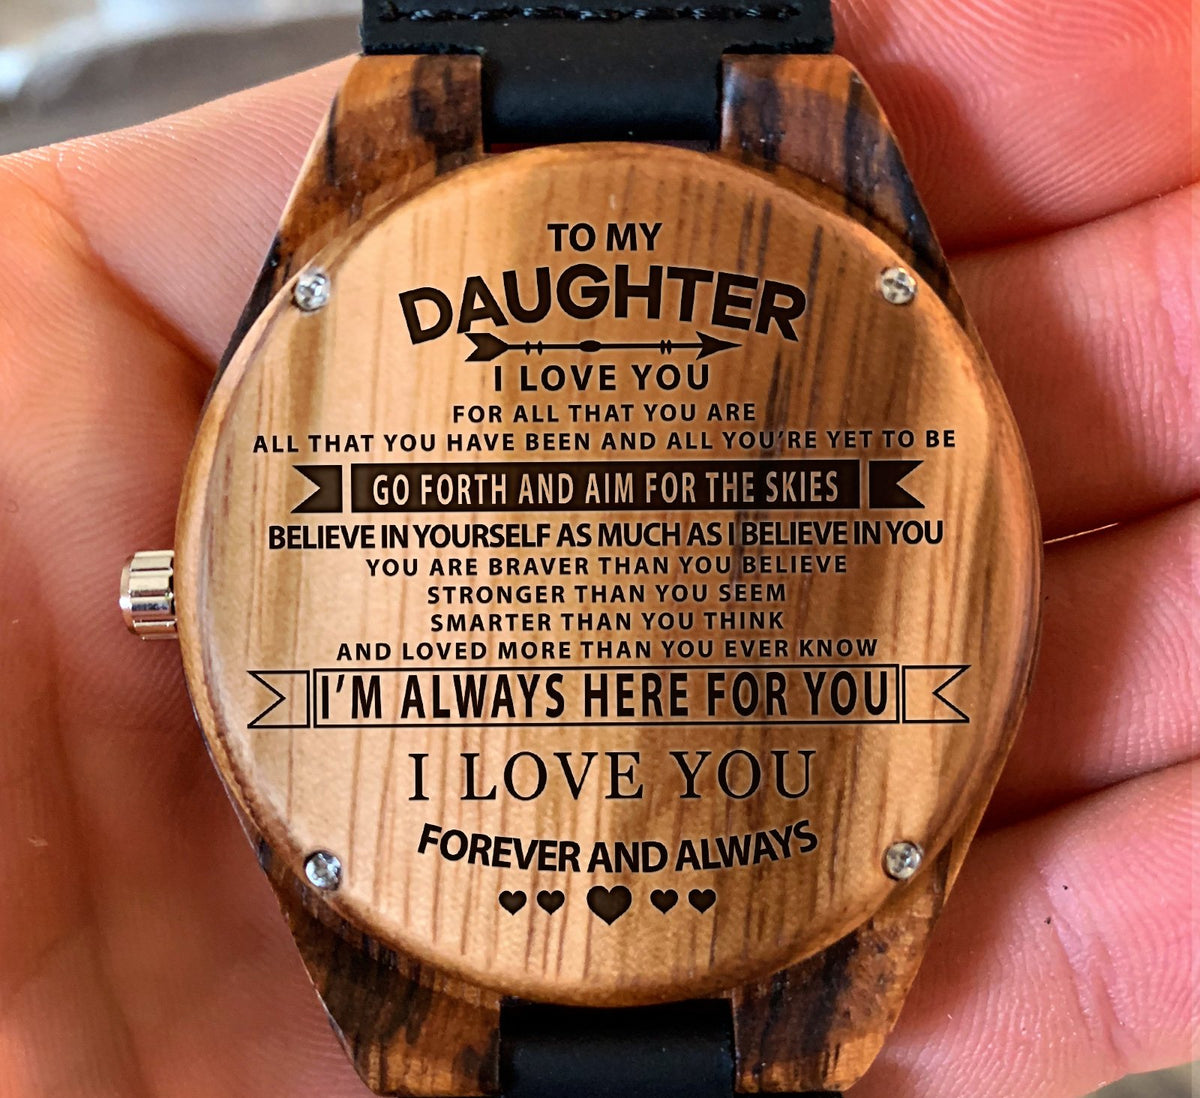 To My Daughter - Believe in Yourself as much as I Believe in You - Wooden Watch